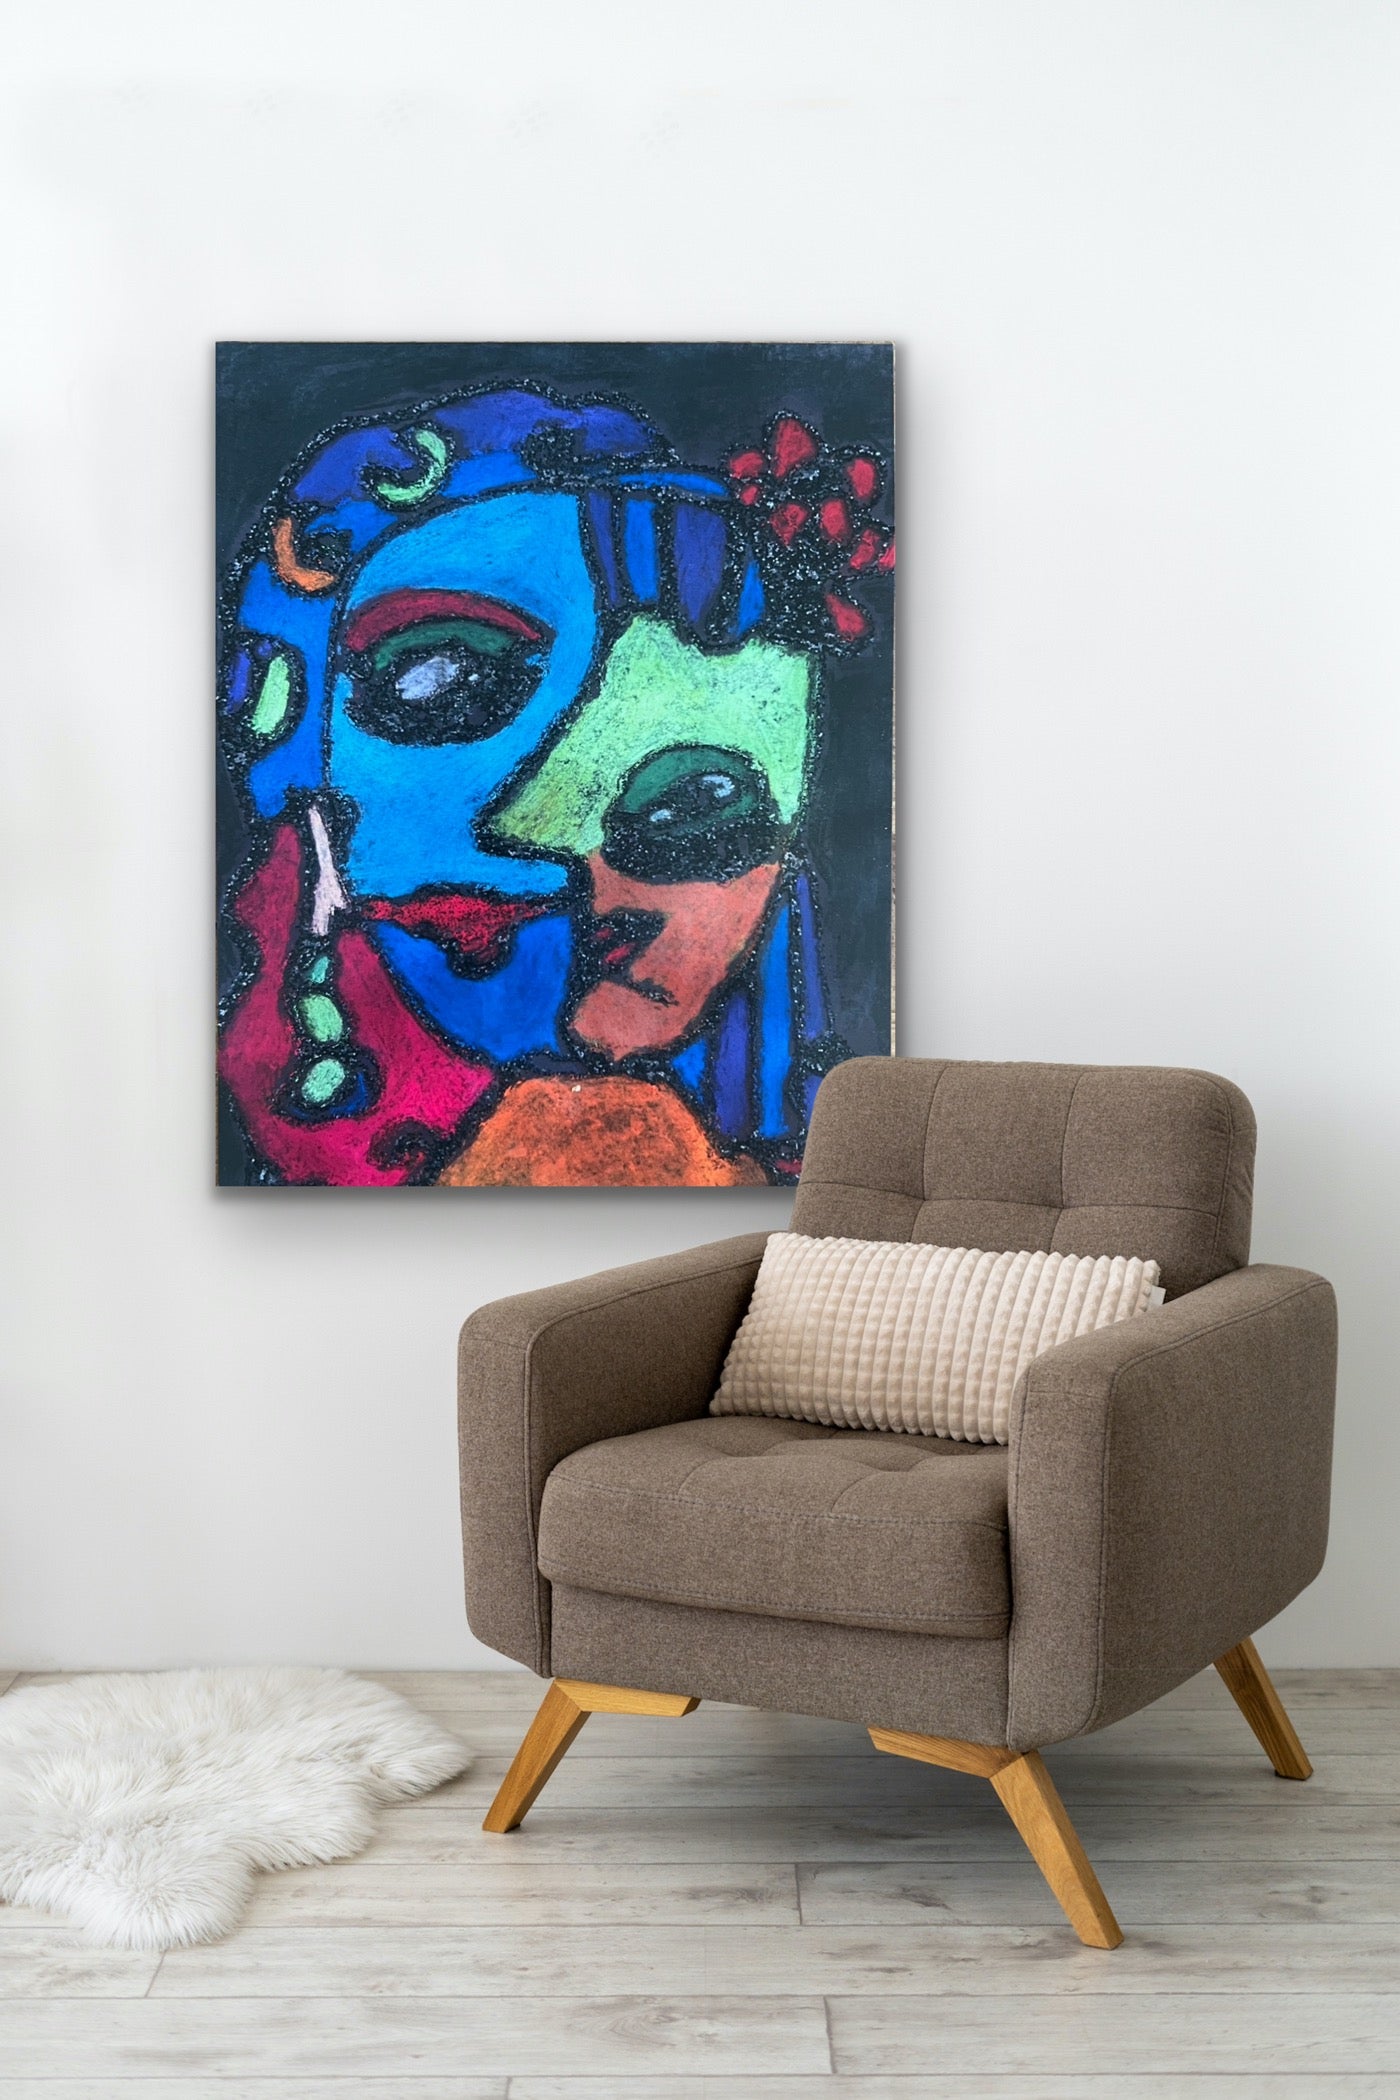 Face No 4 with glitter - Stretched Canvas Print in more sizes